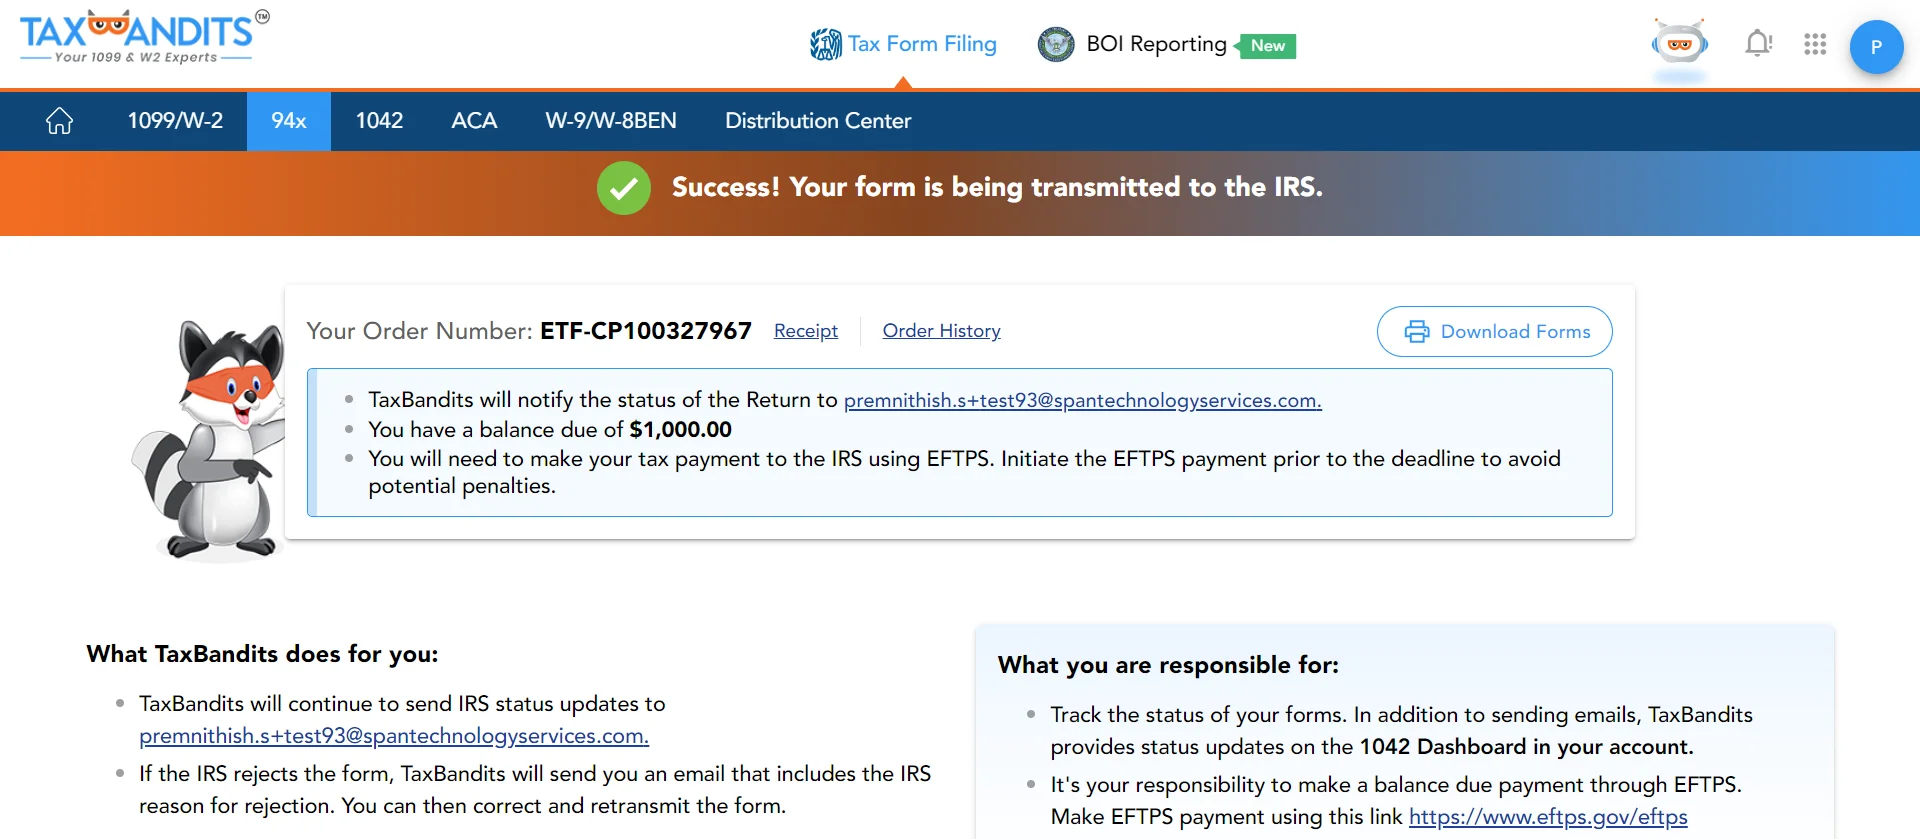 Transmit your corrected return to the IRS